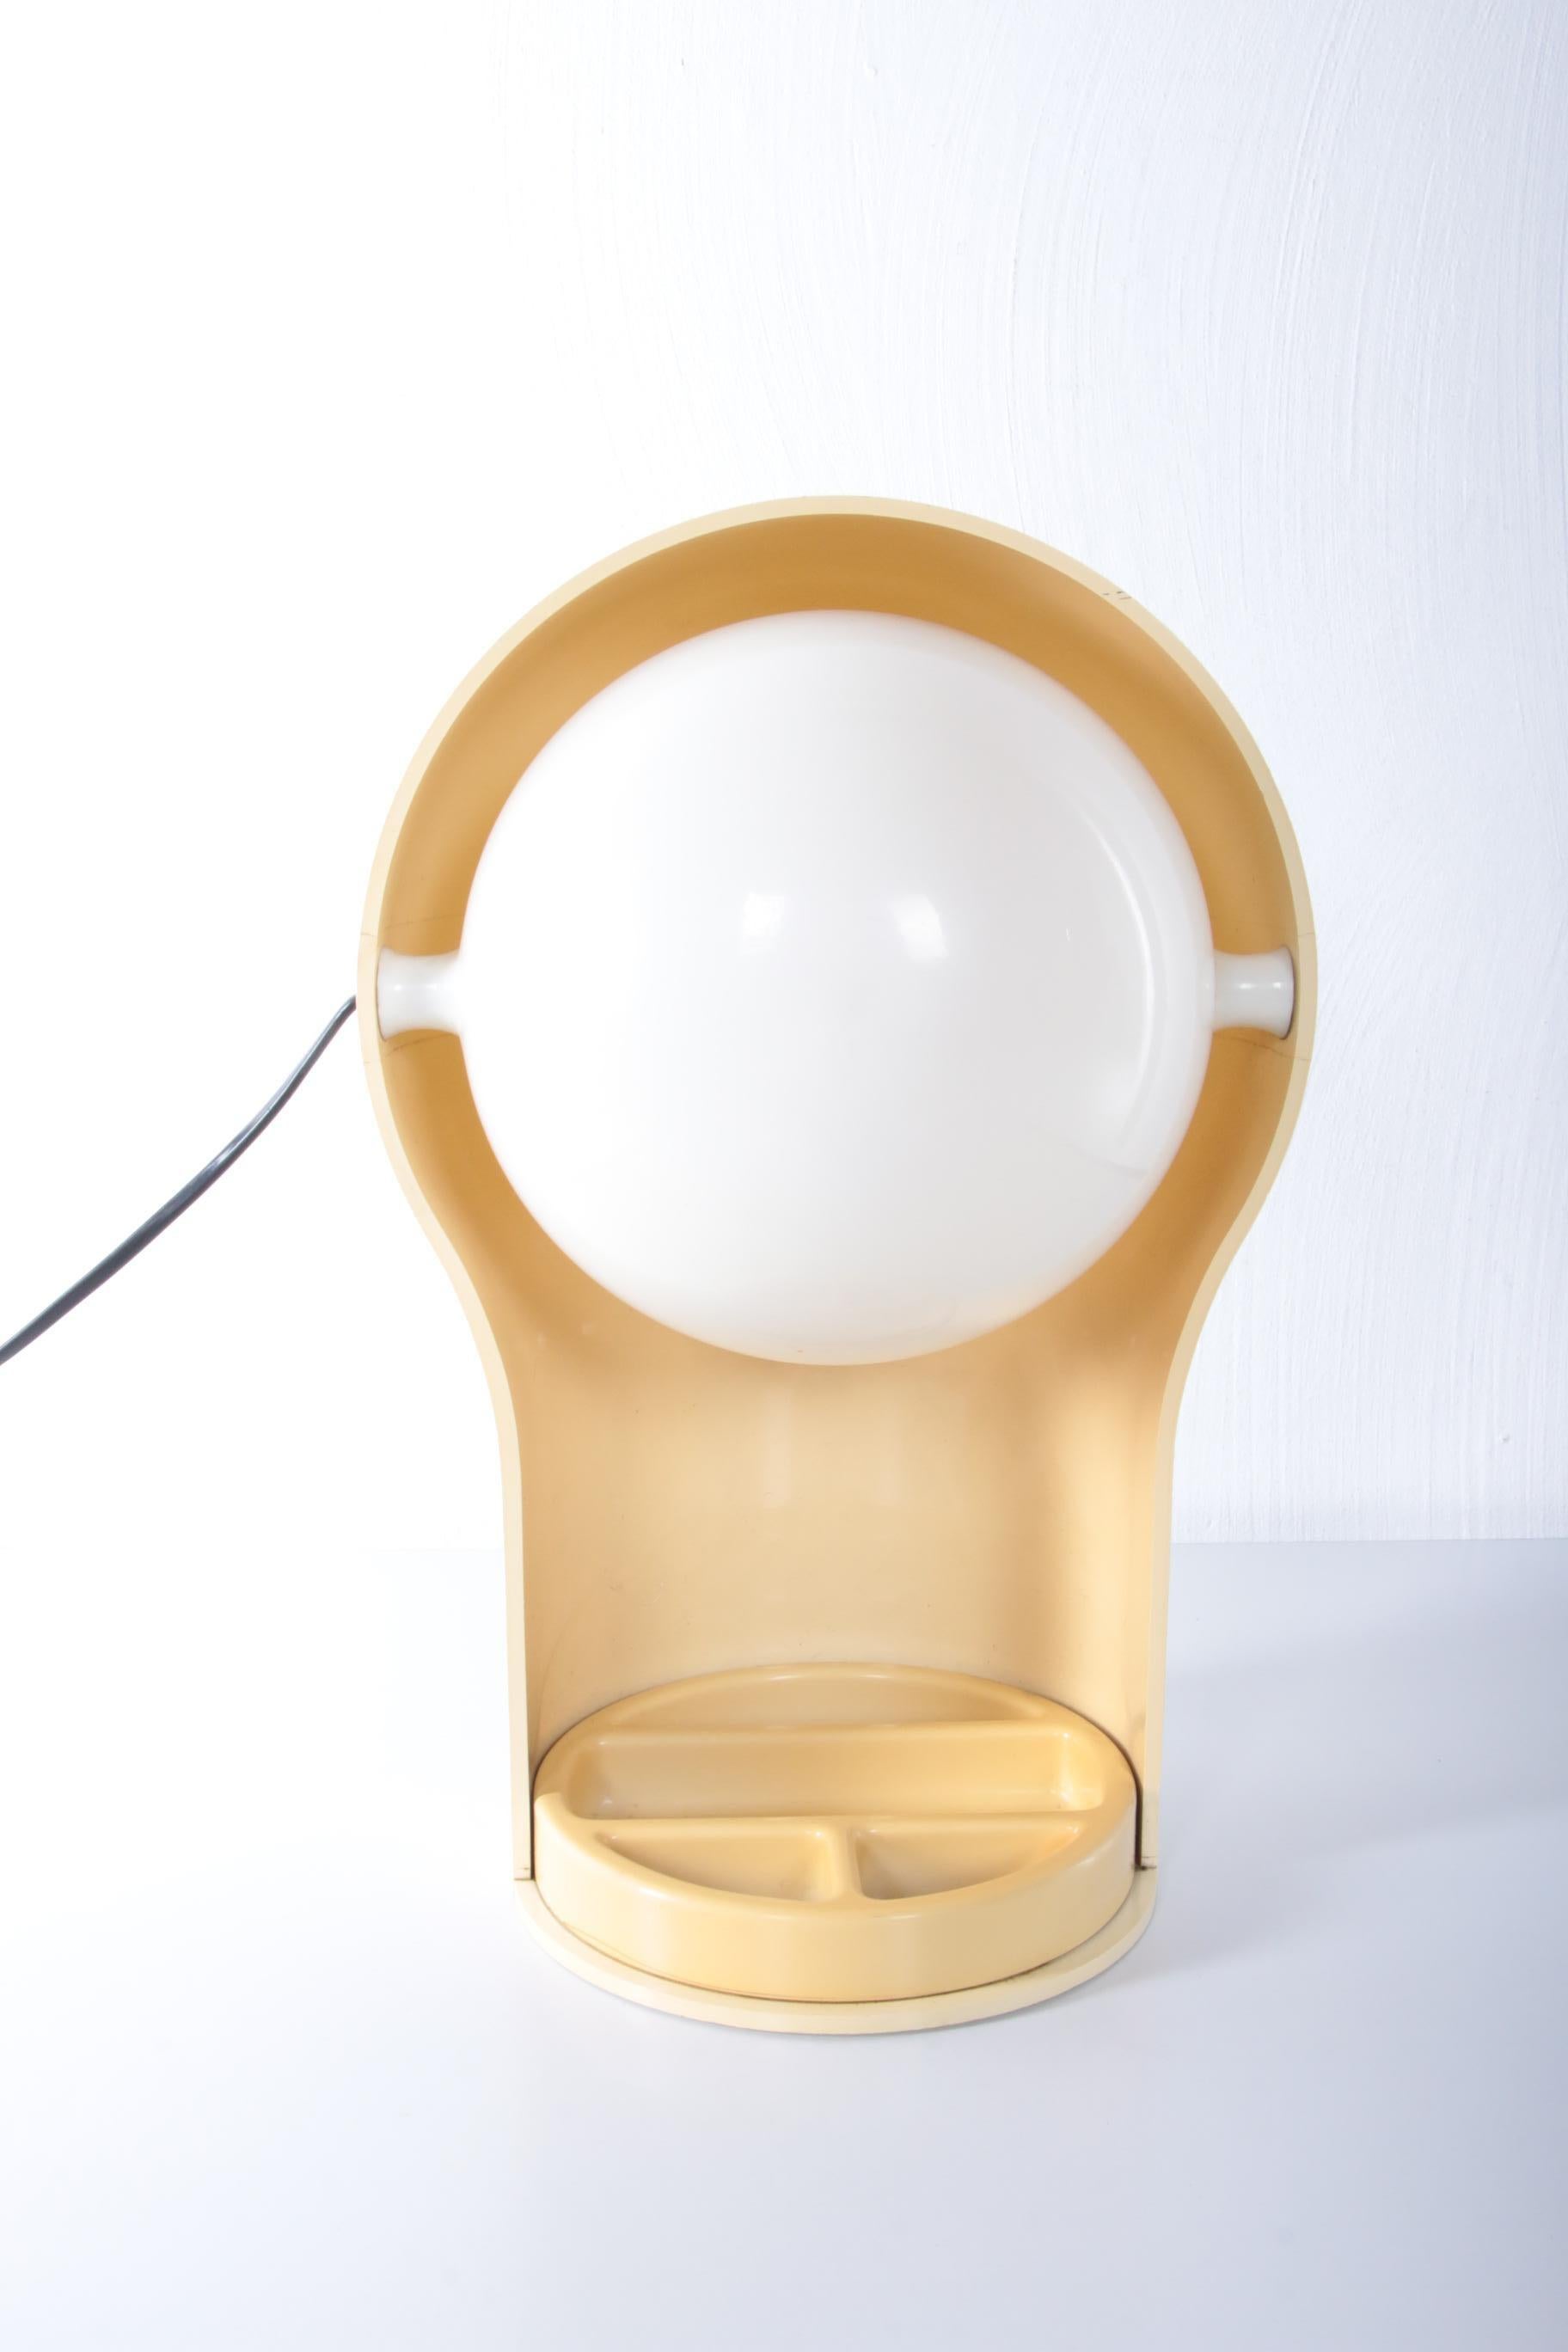 Vico Magistretti Desk lamp Model Telegono made by Artemide, 1960s Italy.

Cream elegono lamp designed by Vico Magistretti in the 1960s for Artemide.

The design of this desk lamp, with a pencil box, is based on a combination of primary geometric